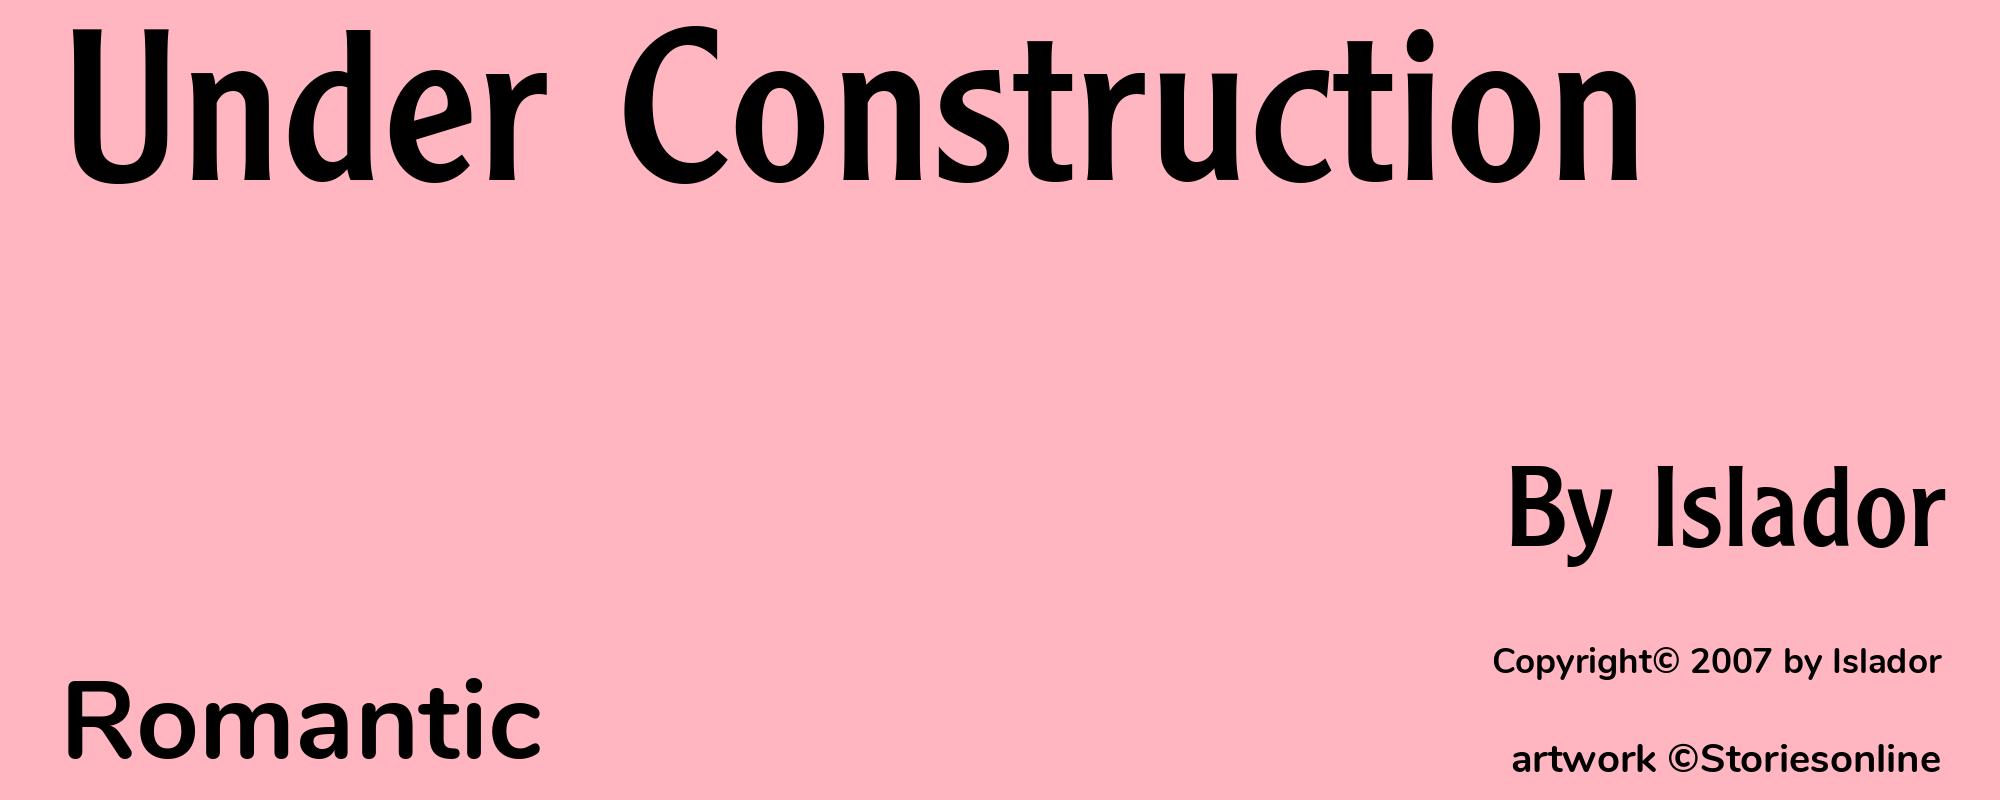 Under Construction - Cover